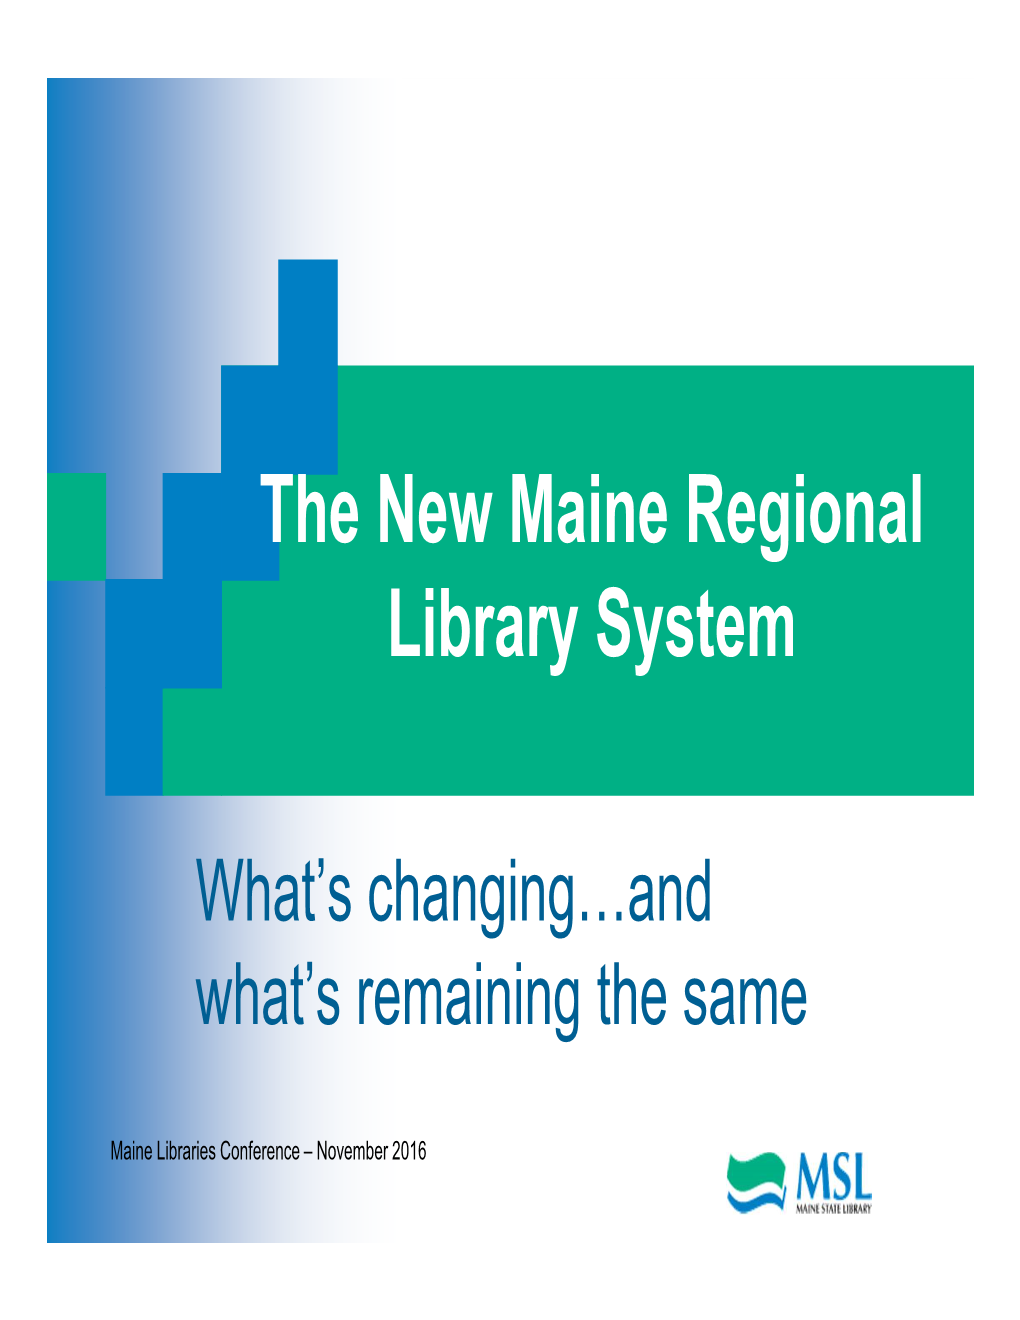 The New Maine Regional Library System